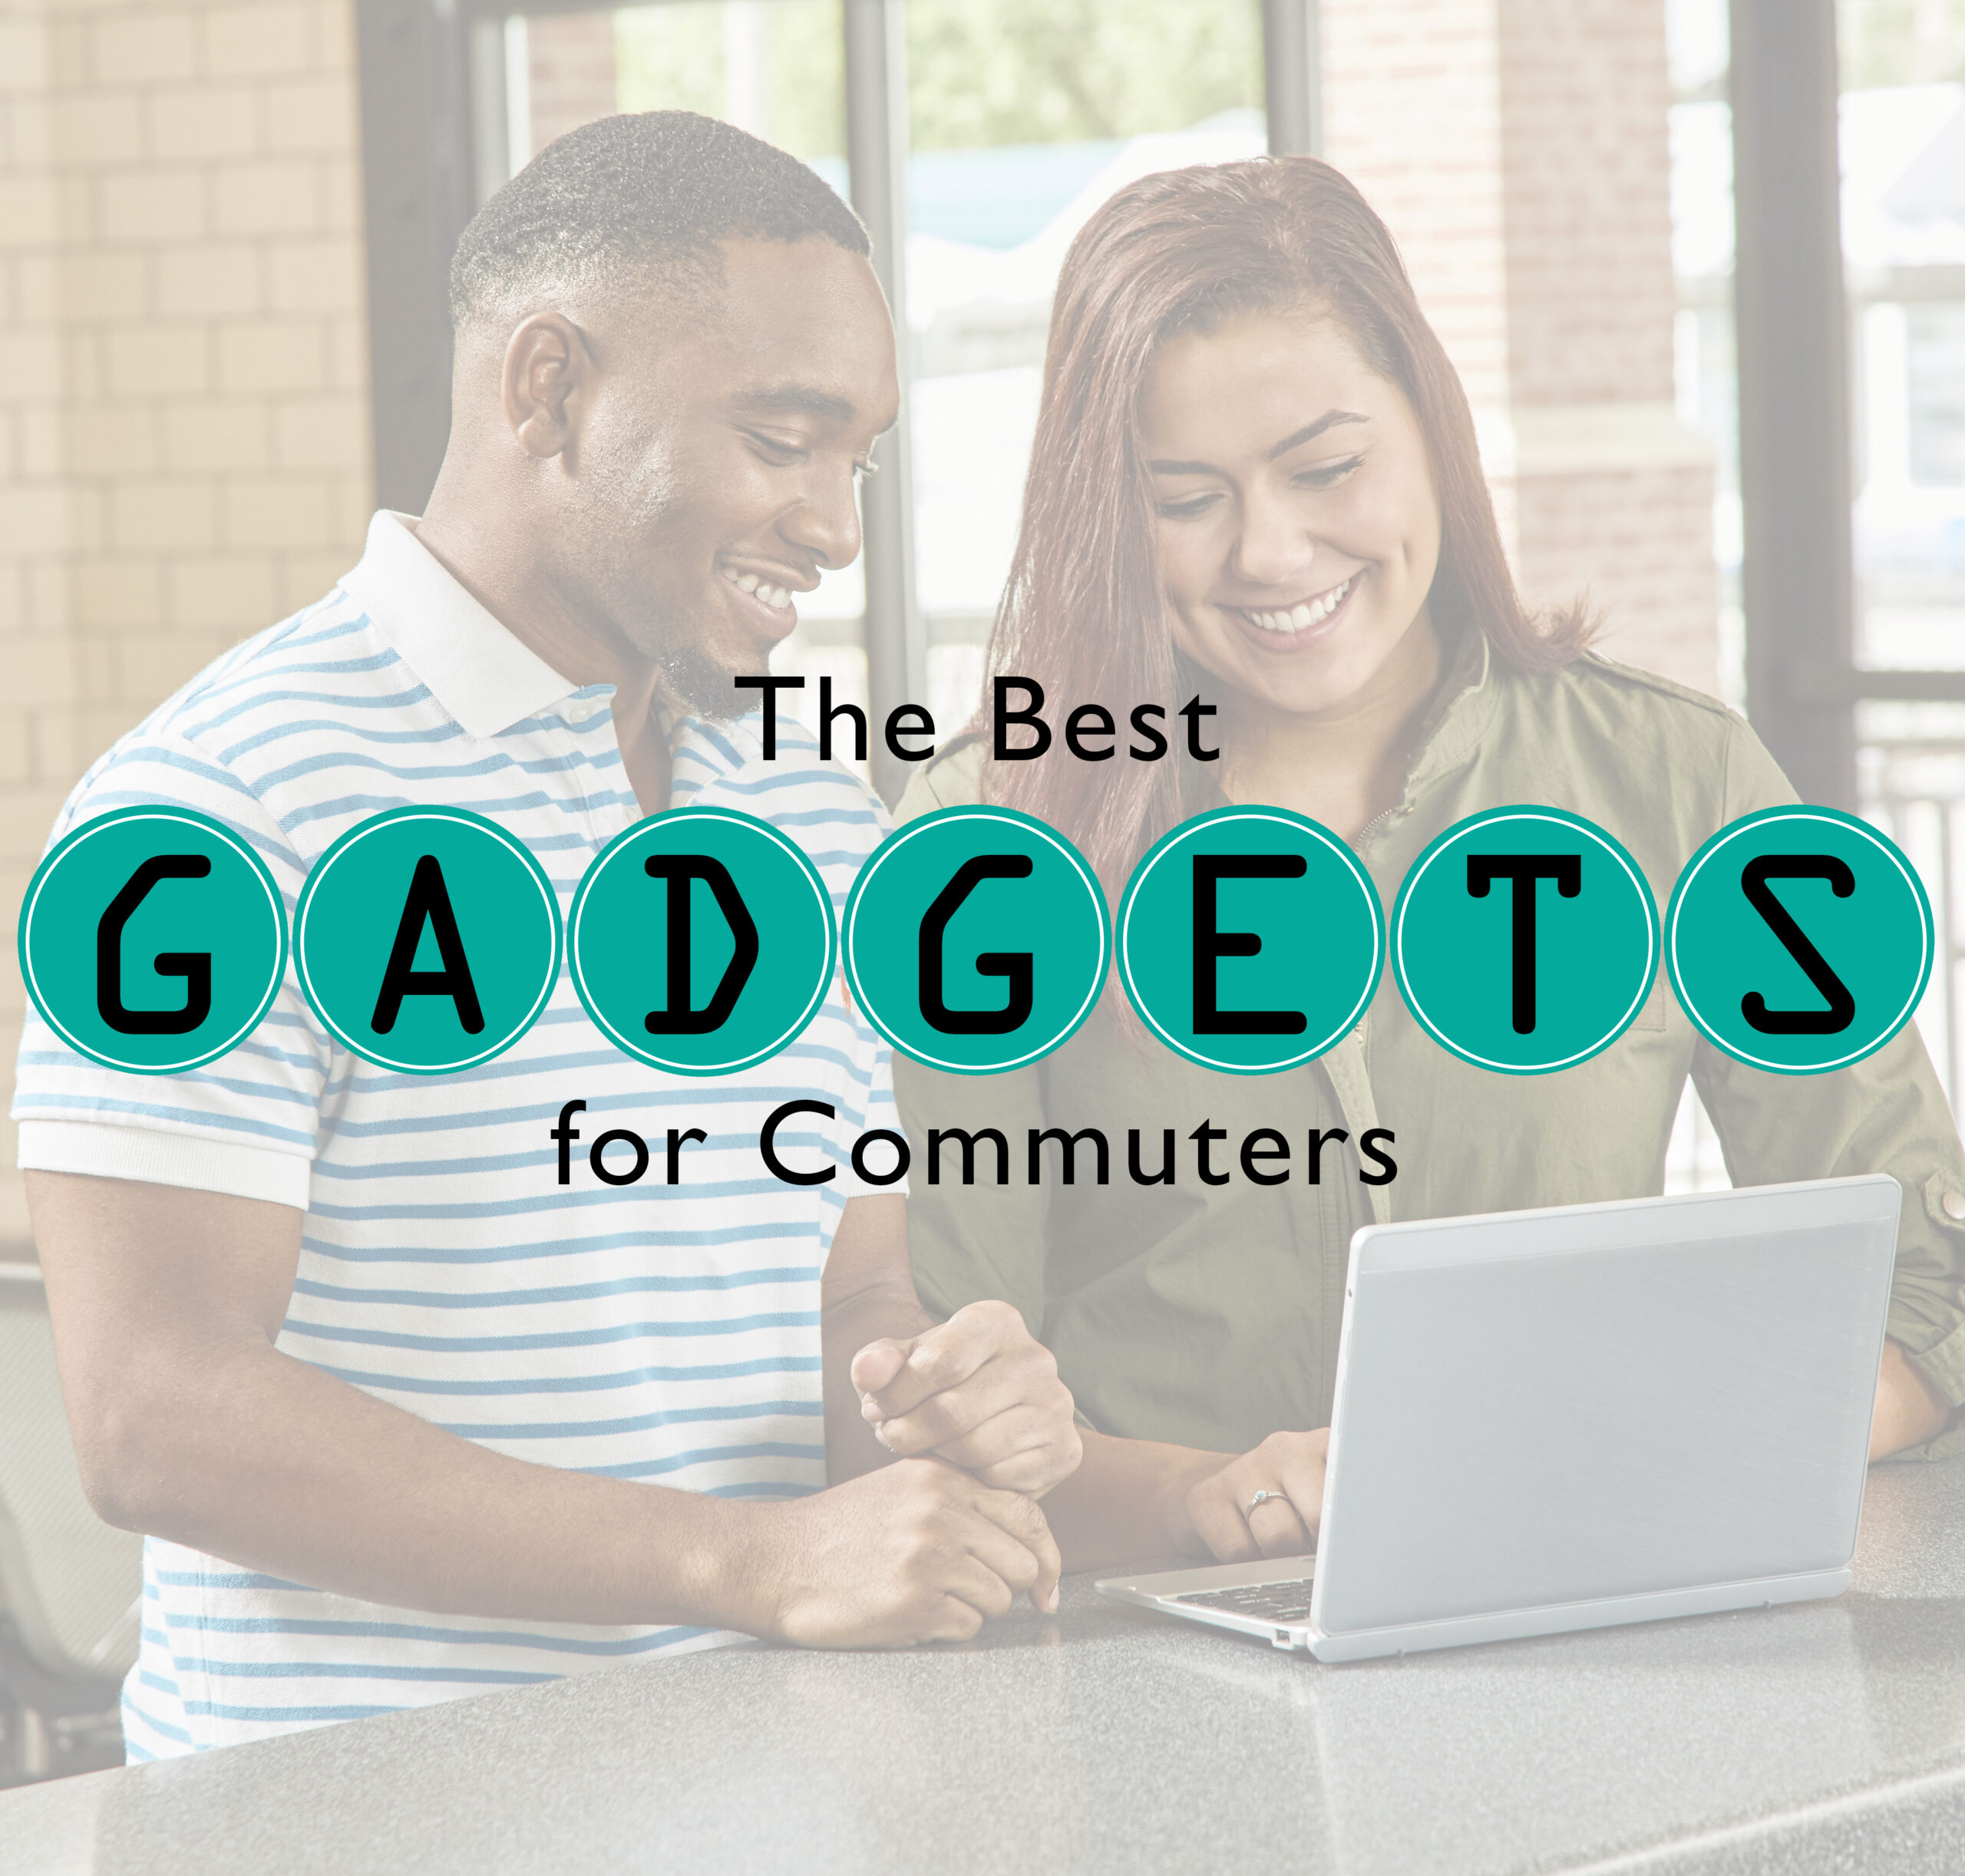 Top Five Gadgets for Your Commute